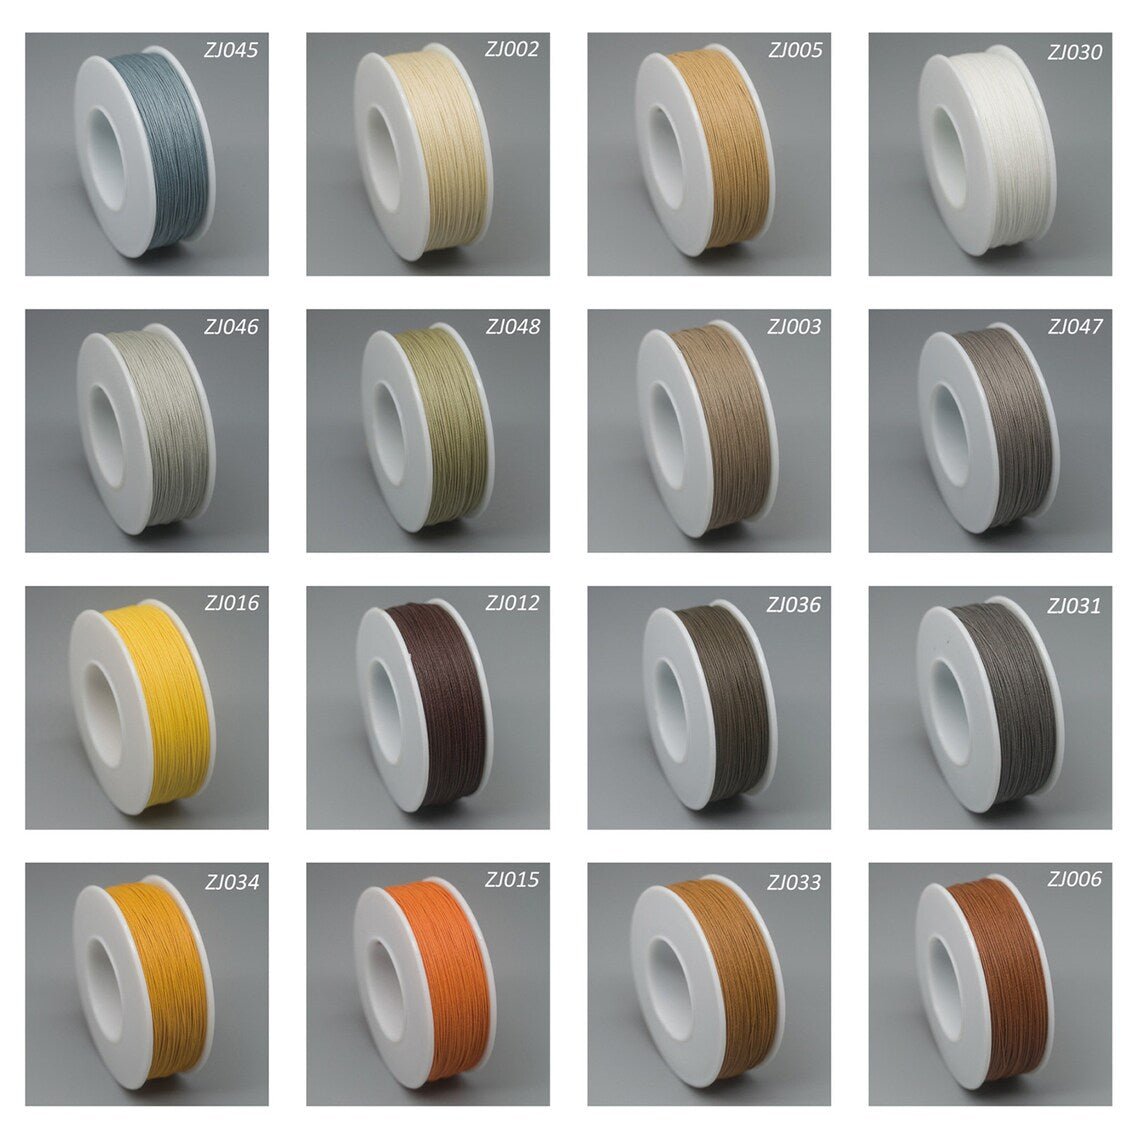 Famous ZJ#5 0.47-0.50mm Linen Waxed Threads For Handmade Letherwork, Thread For Leather, Sewing Thread ThreadsZJ